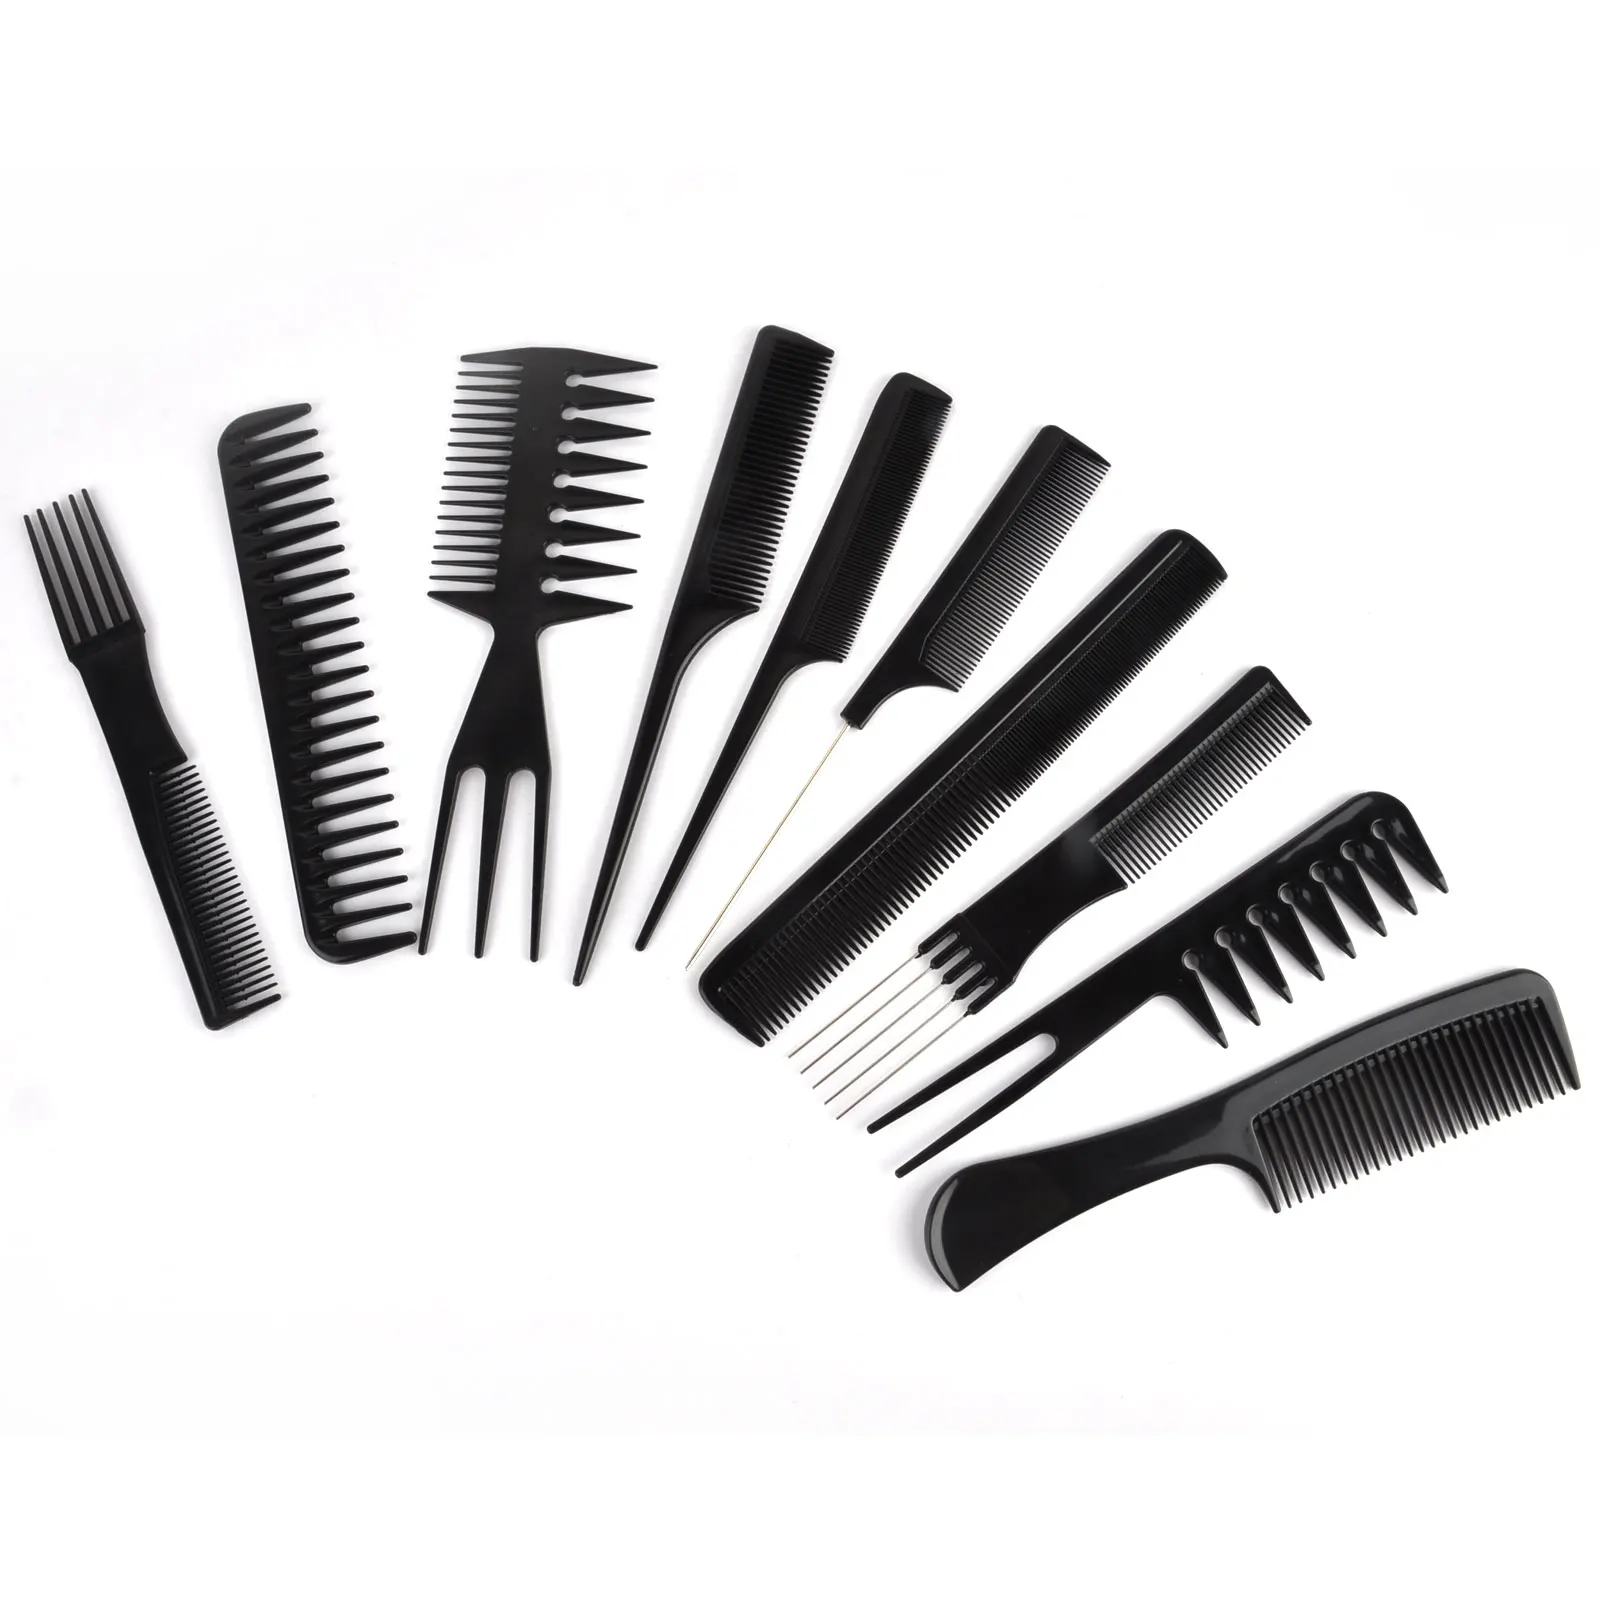 

10in1 Hairdressing Salon Combs Black Barber Hair Brush Professional Stylist Hair Comb Kit Set Styling Tool